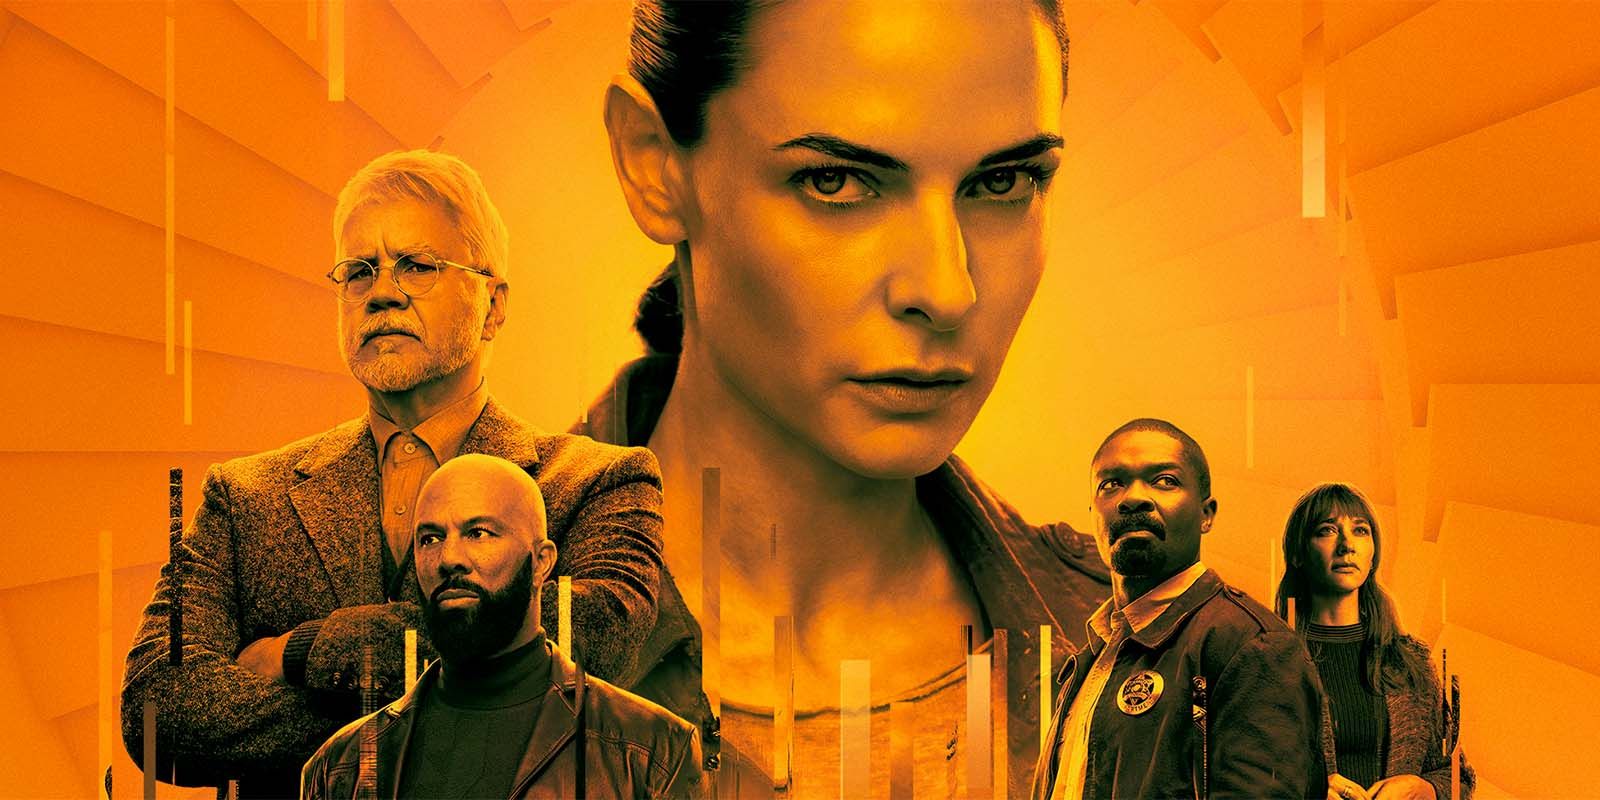 Silo on Apple TV orange poster featuring Rebecca Ferguson's Juliette and characters surrounding her.